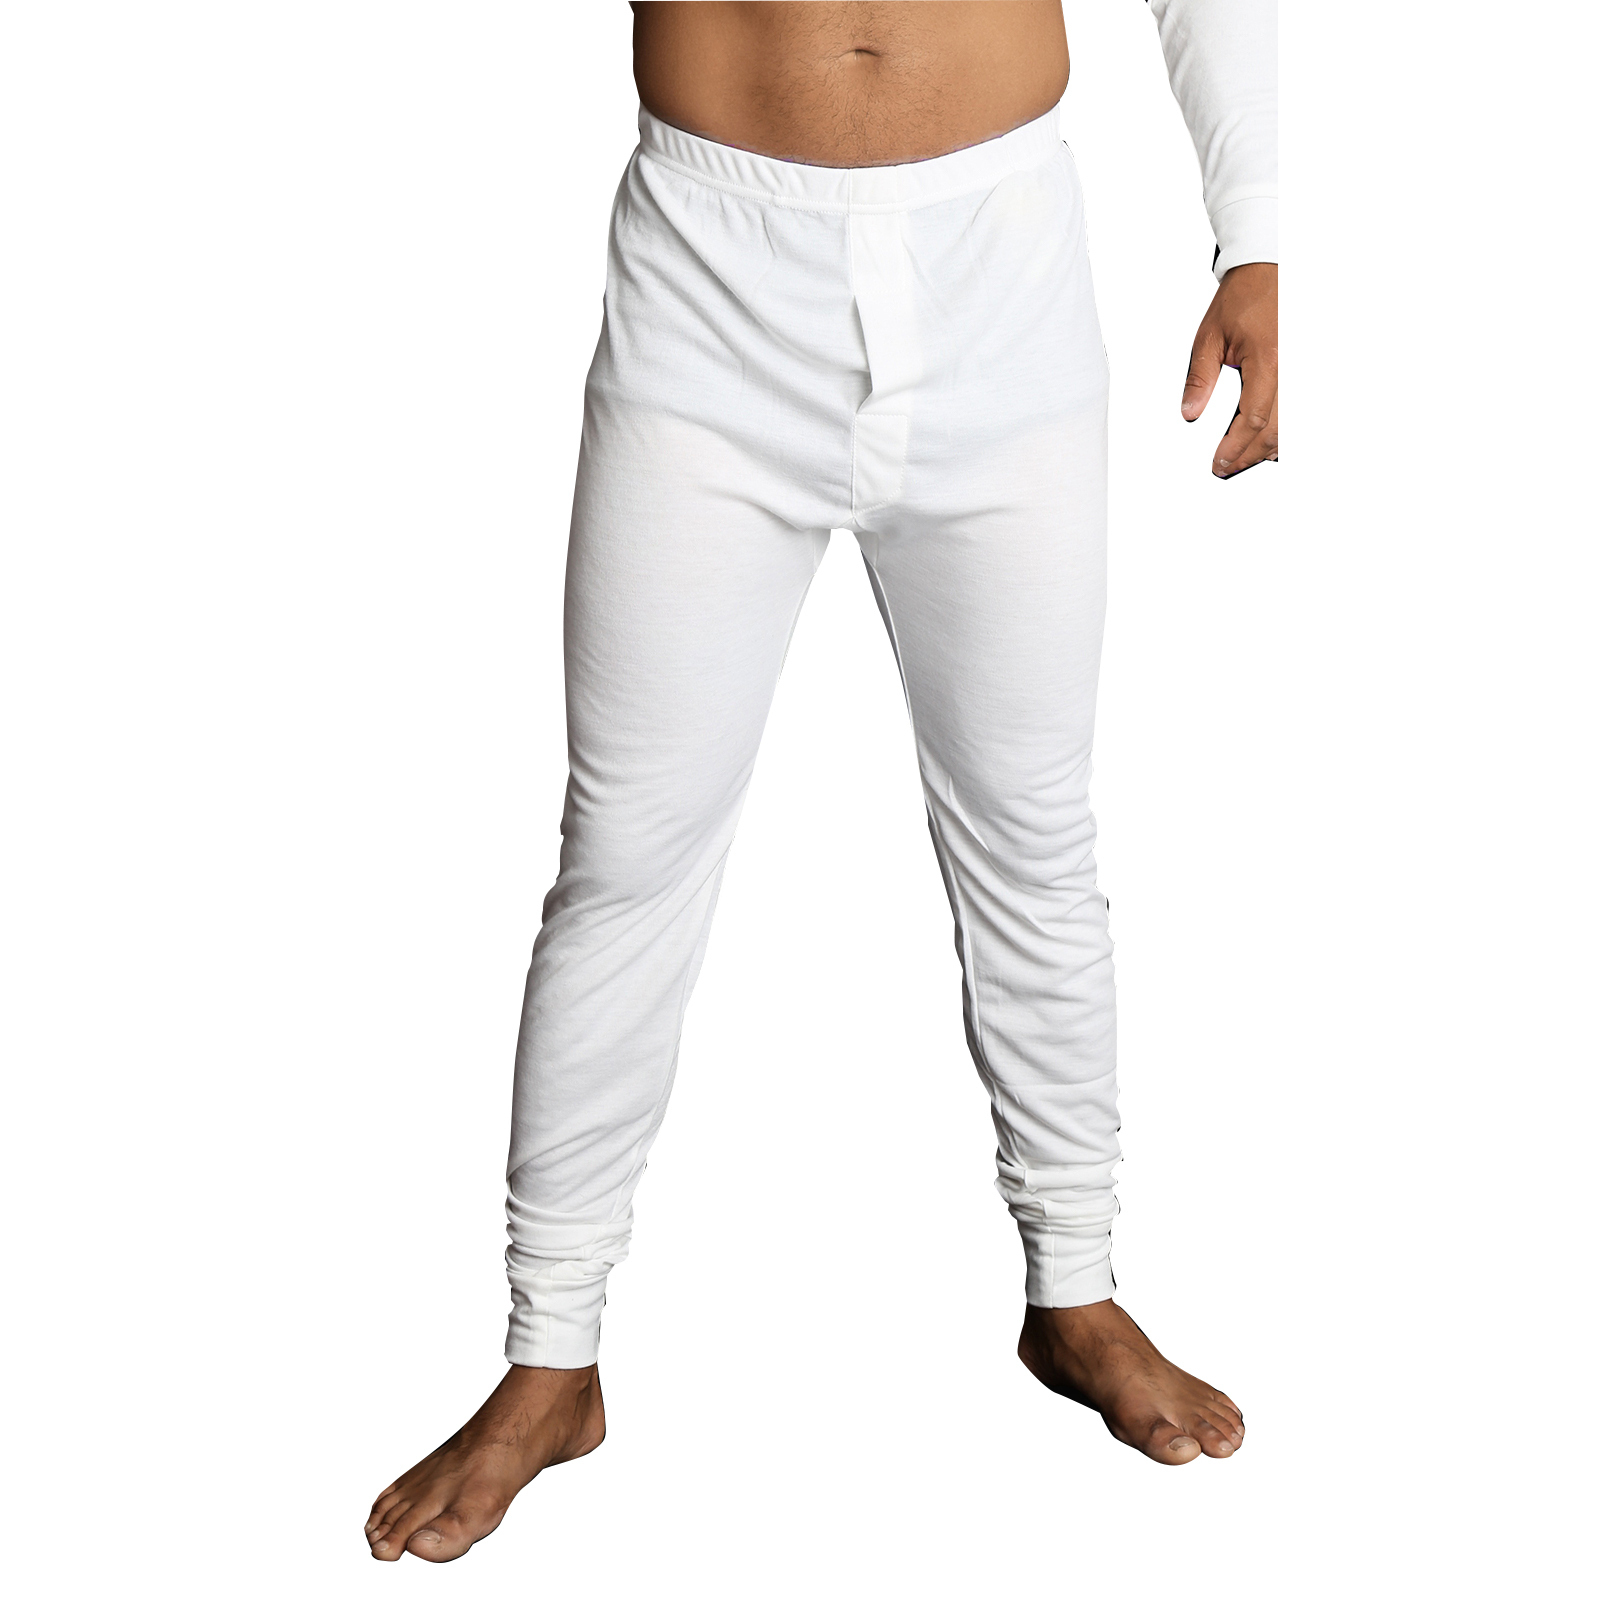 Men's Long Johns Thermal Underwear Thermal Pants 1 PC Plain Home Bed Cotton  Fall Spring White Black 2024 - $15.99